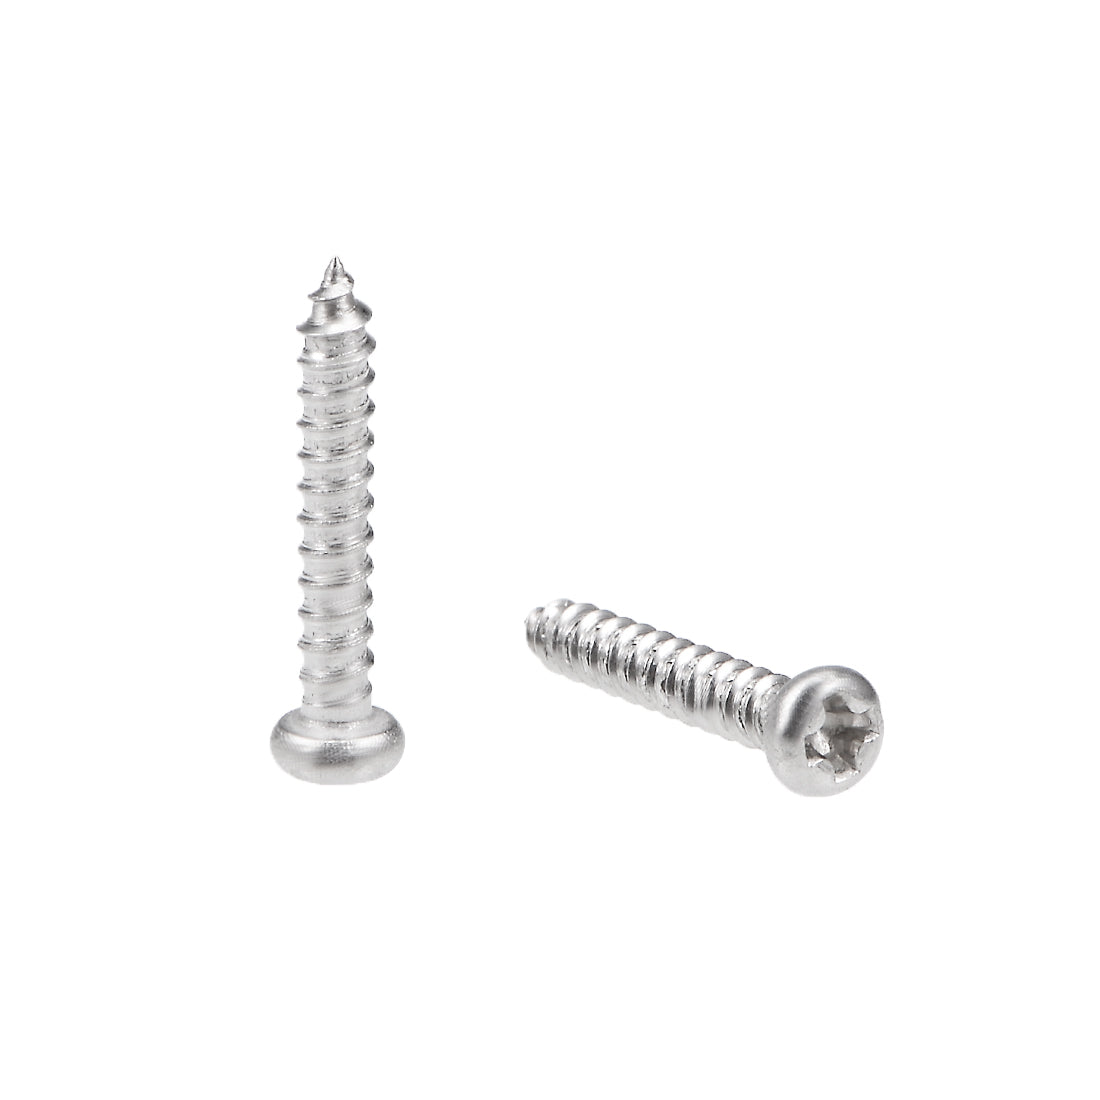 uxcell Uxcell 2x12mm Self Tapping Screws Phillips Pan Head Screw 316 Stainless Steel Fasteners Bolts 50Pcs